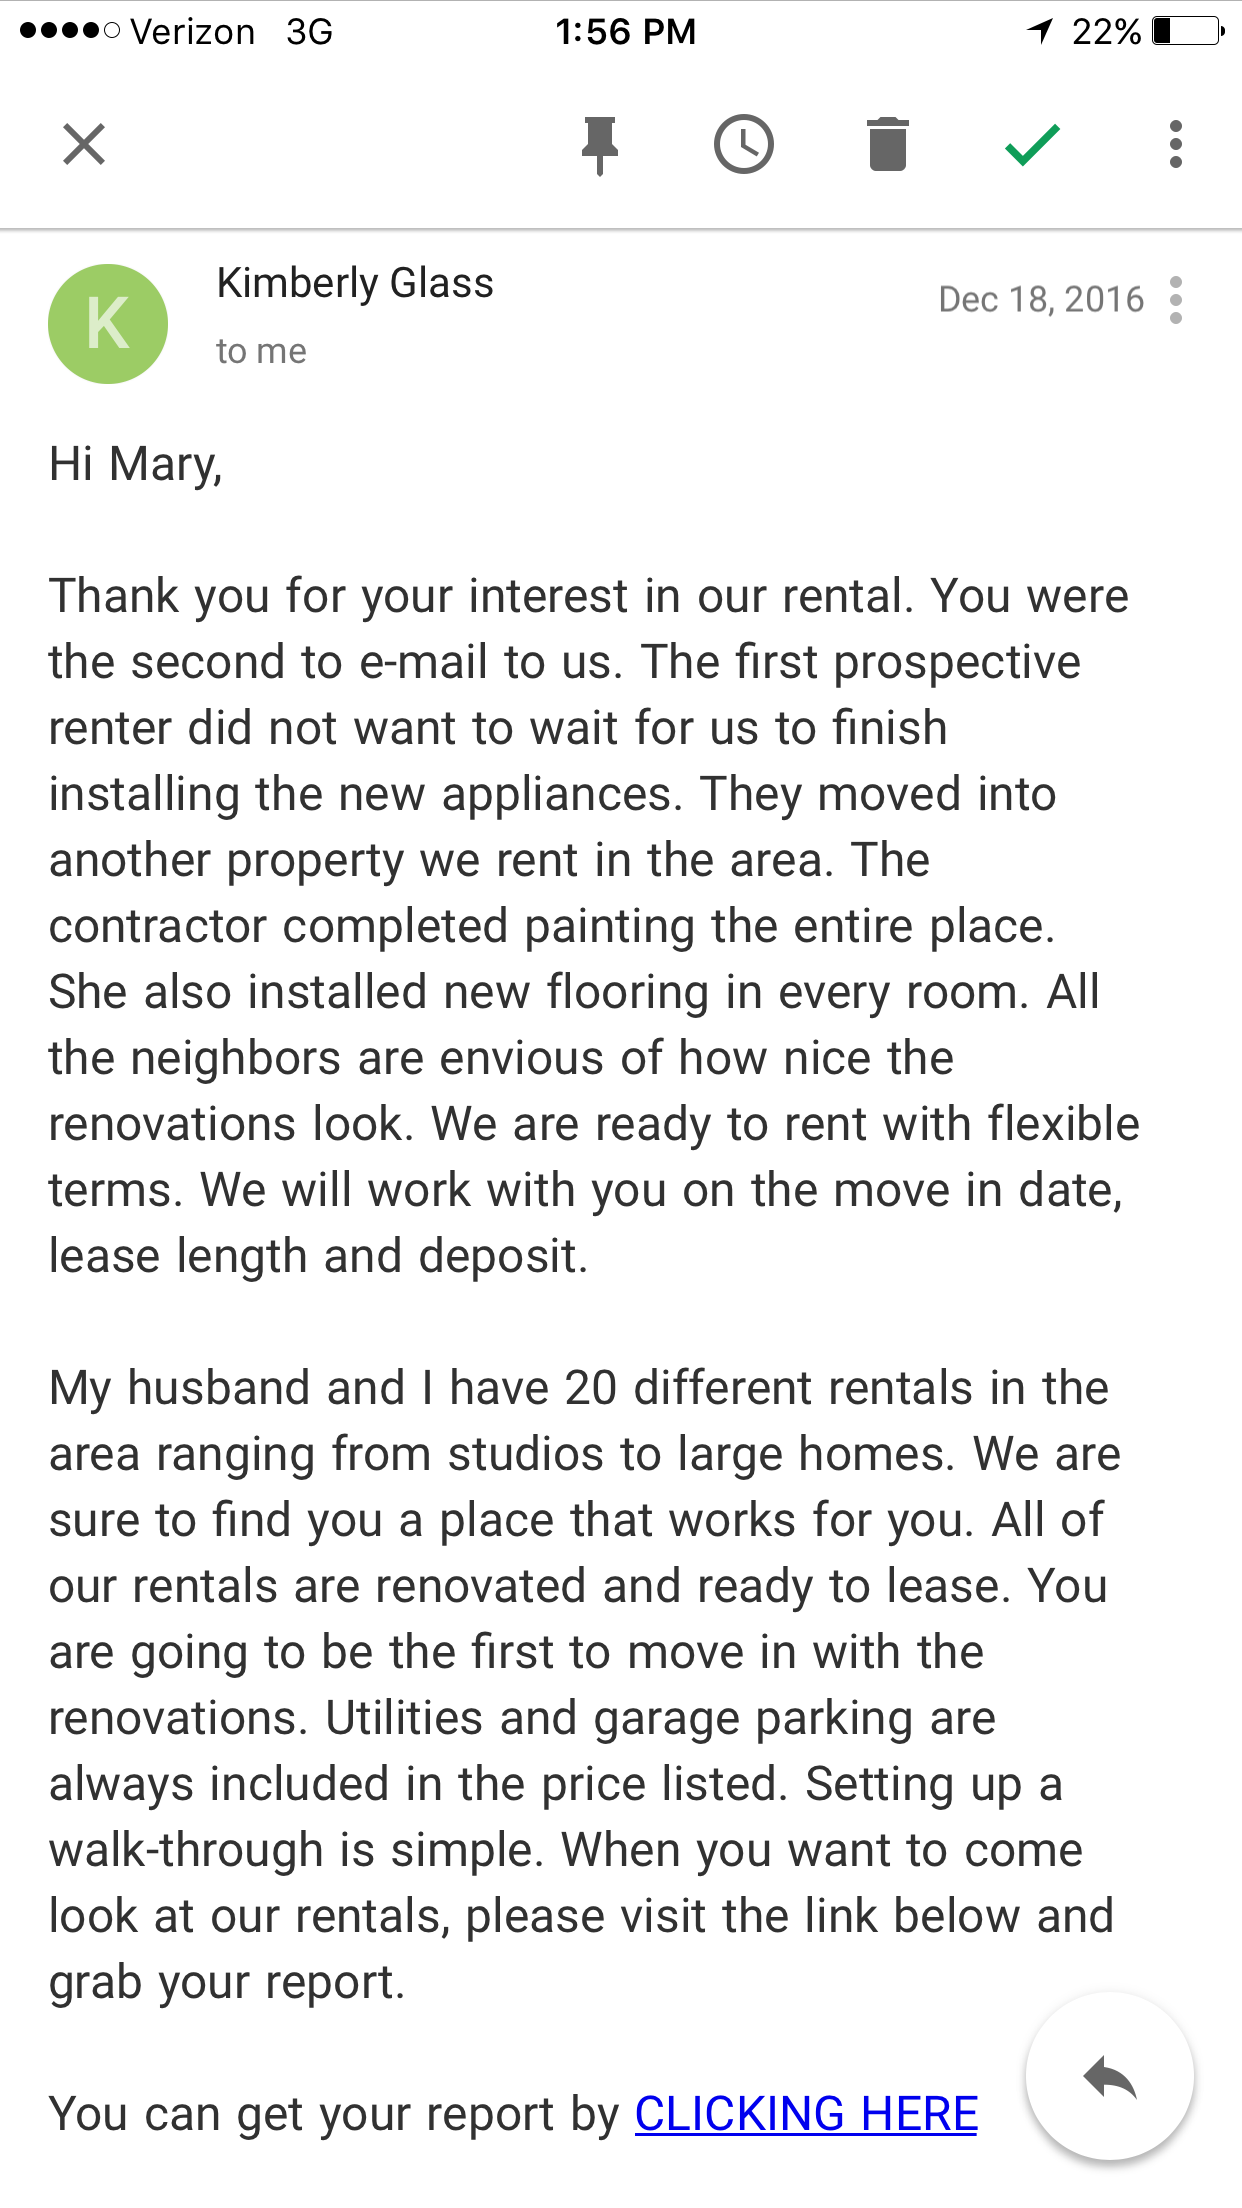 The email response received after responding to the rental ad linking to the creditupdates.com